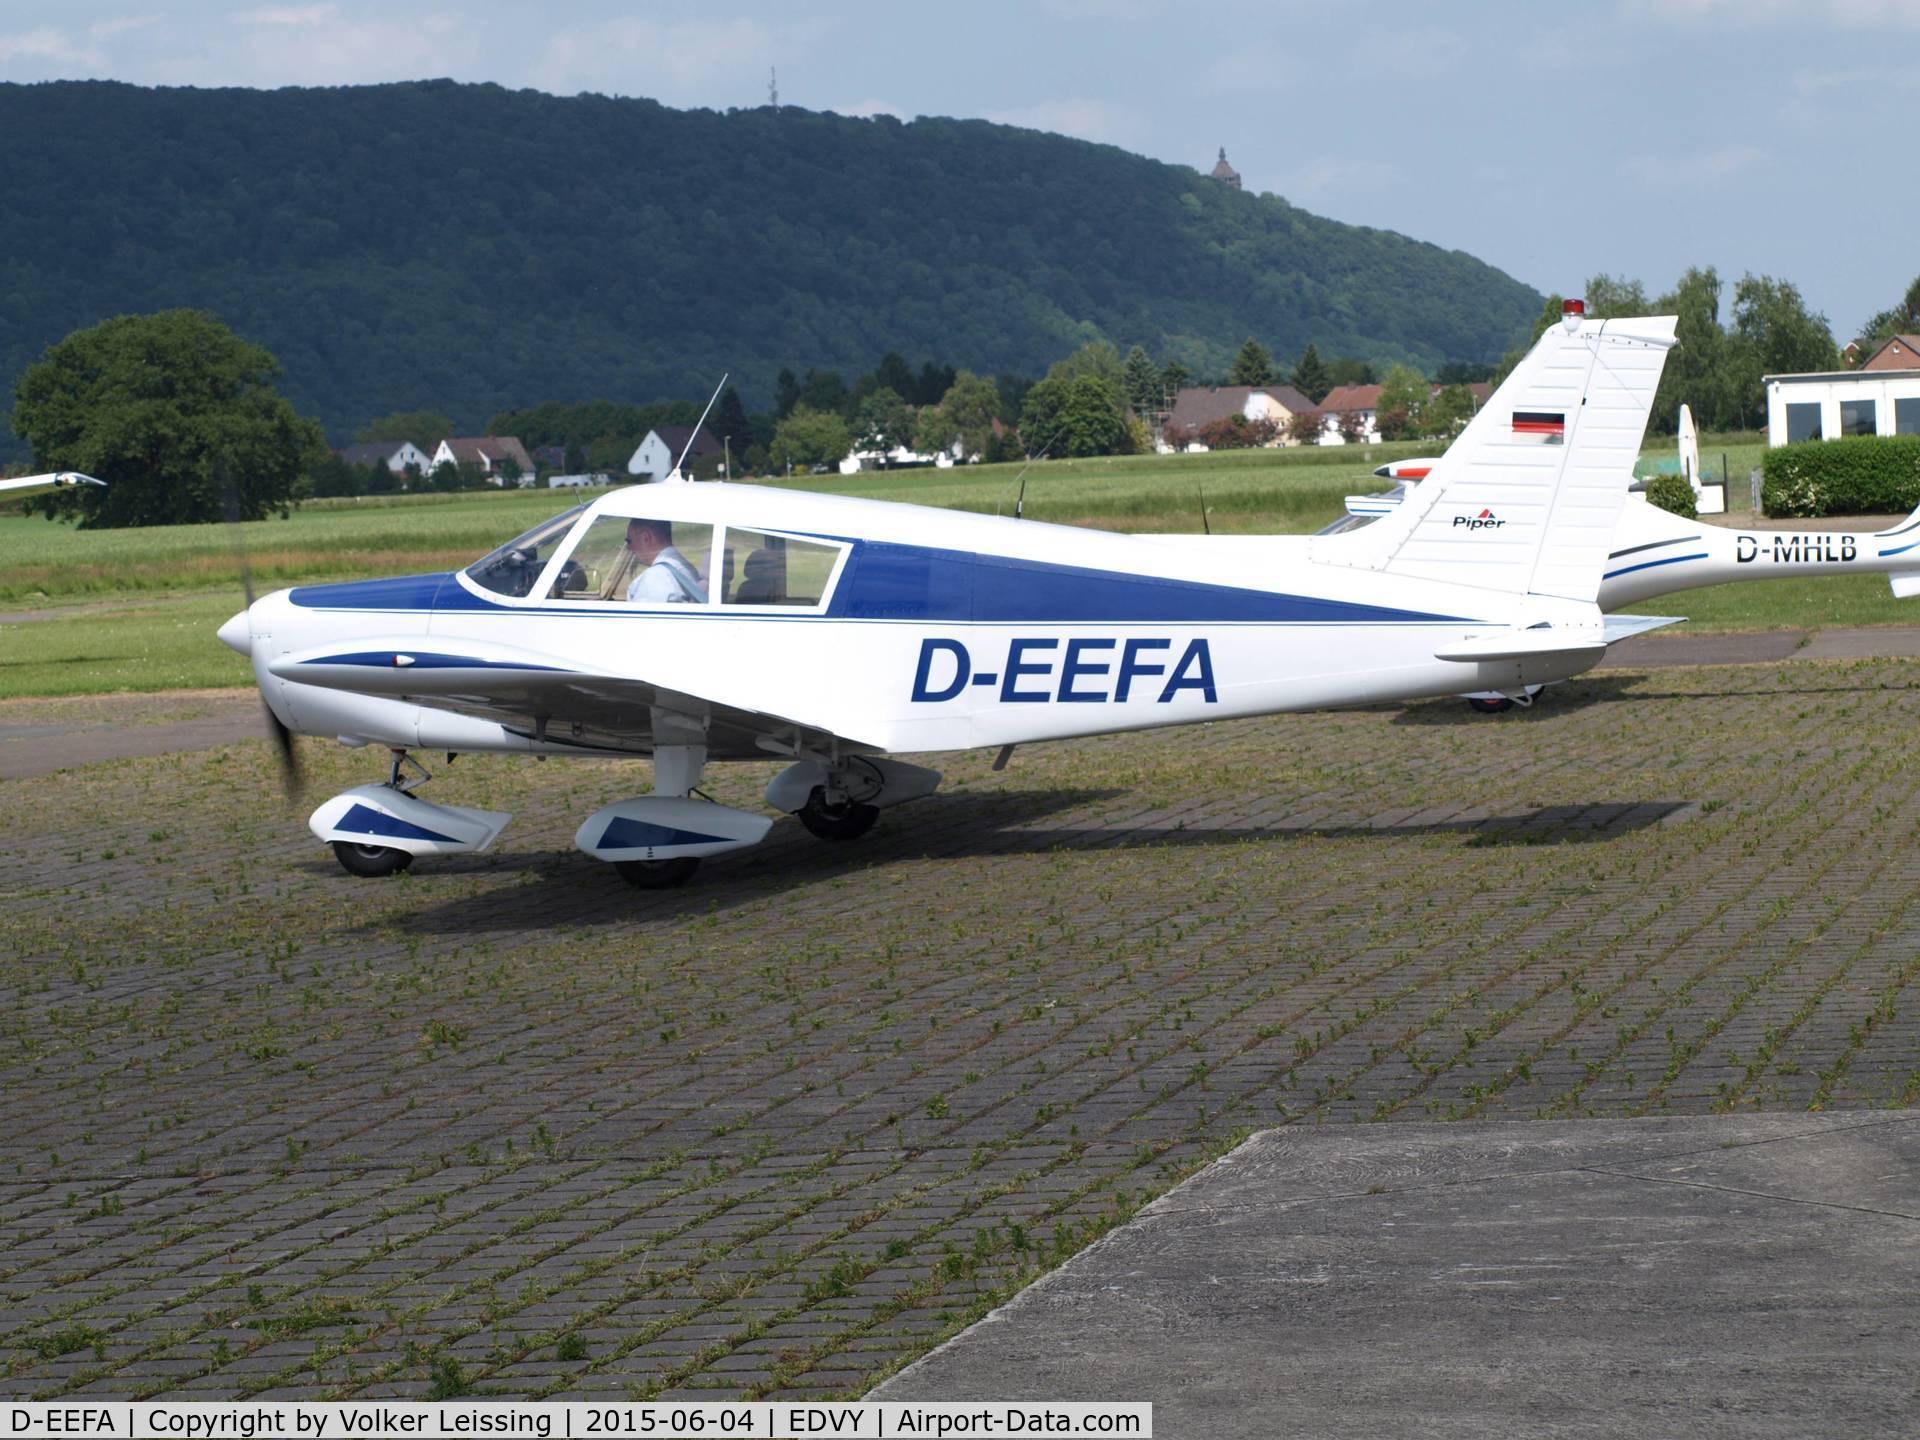 D-EEFA, 1970 Piper PA 28-140 C/N 28-26658, ready for taxi